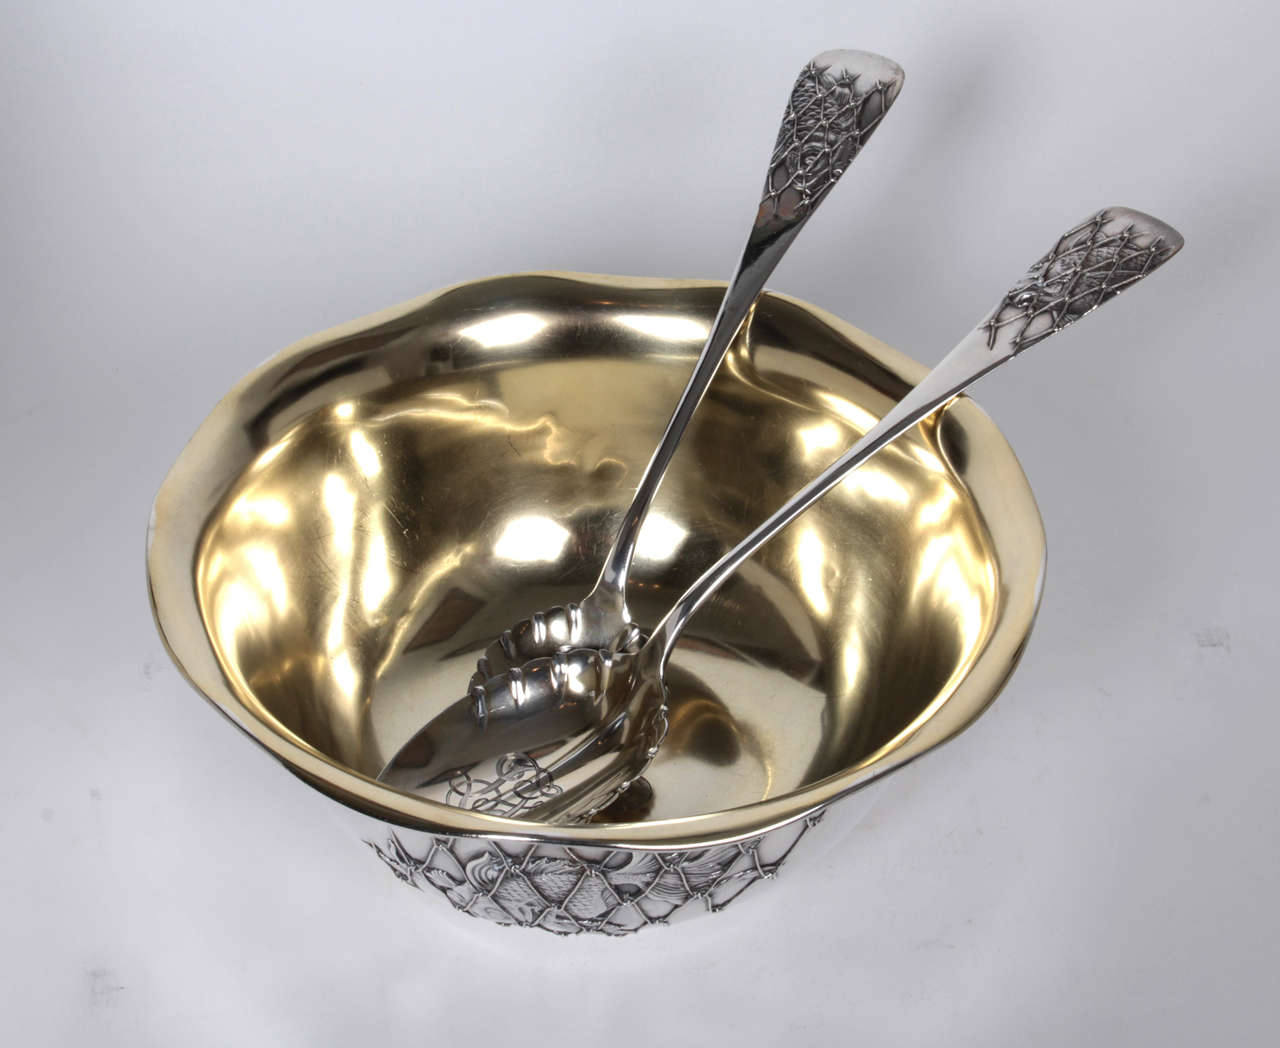 WHITING MANUFACTURING CO.  North Attleboro, MA

“Koi” serving bowl with matching servers   c. 1880

Sterling silver serving bowl and matching servers with applications of Koi fish behind nets, gilt interior

Marks: on base: lion with W in oval